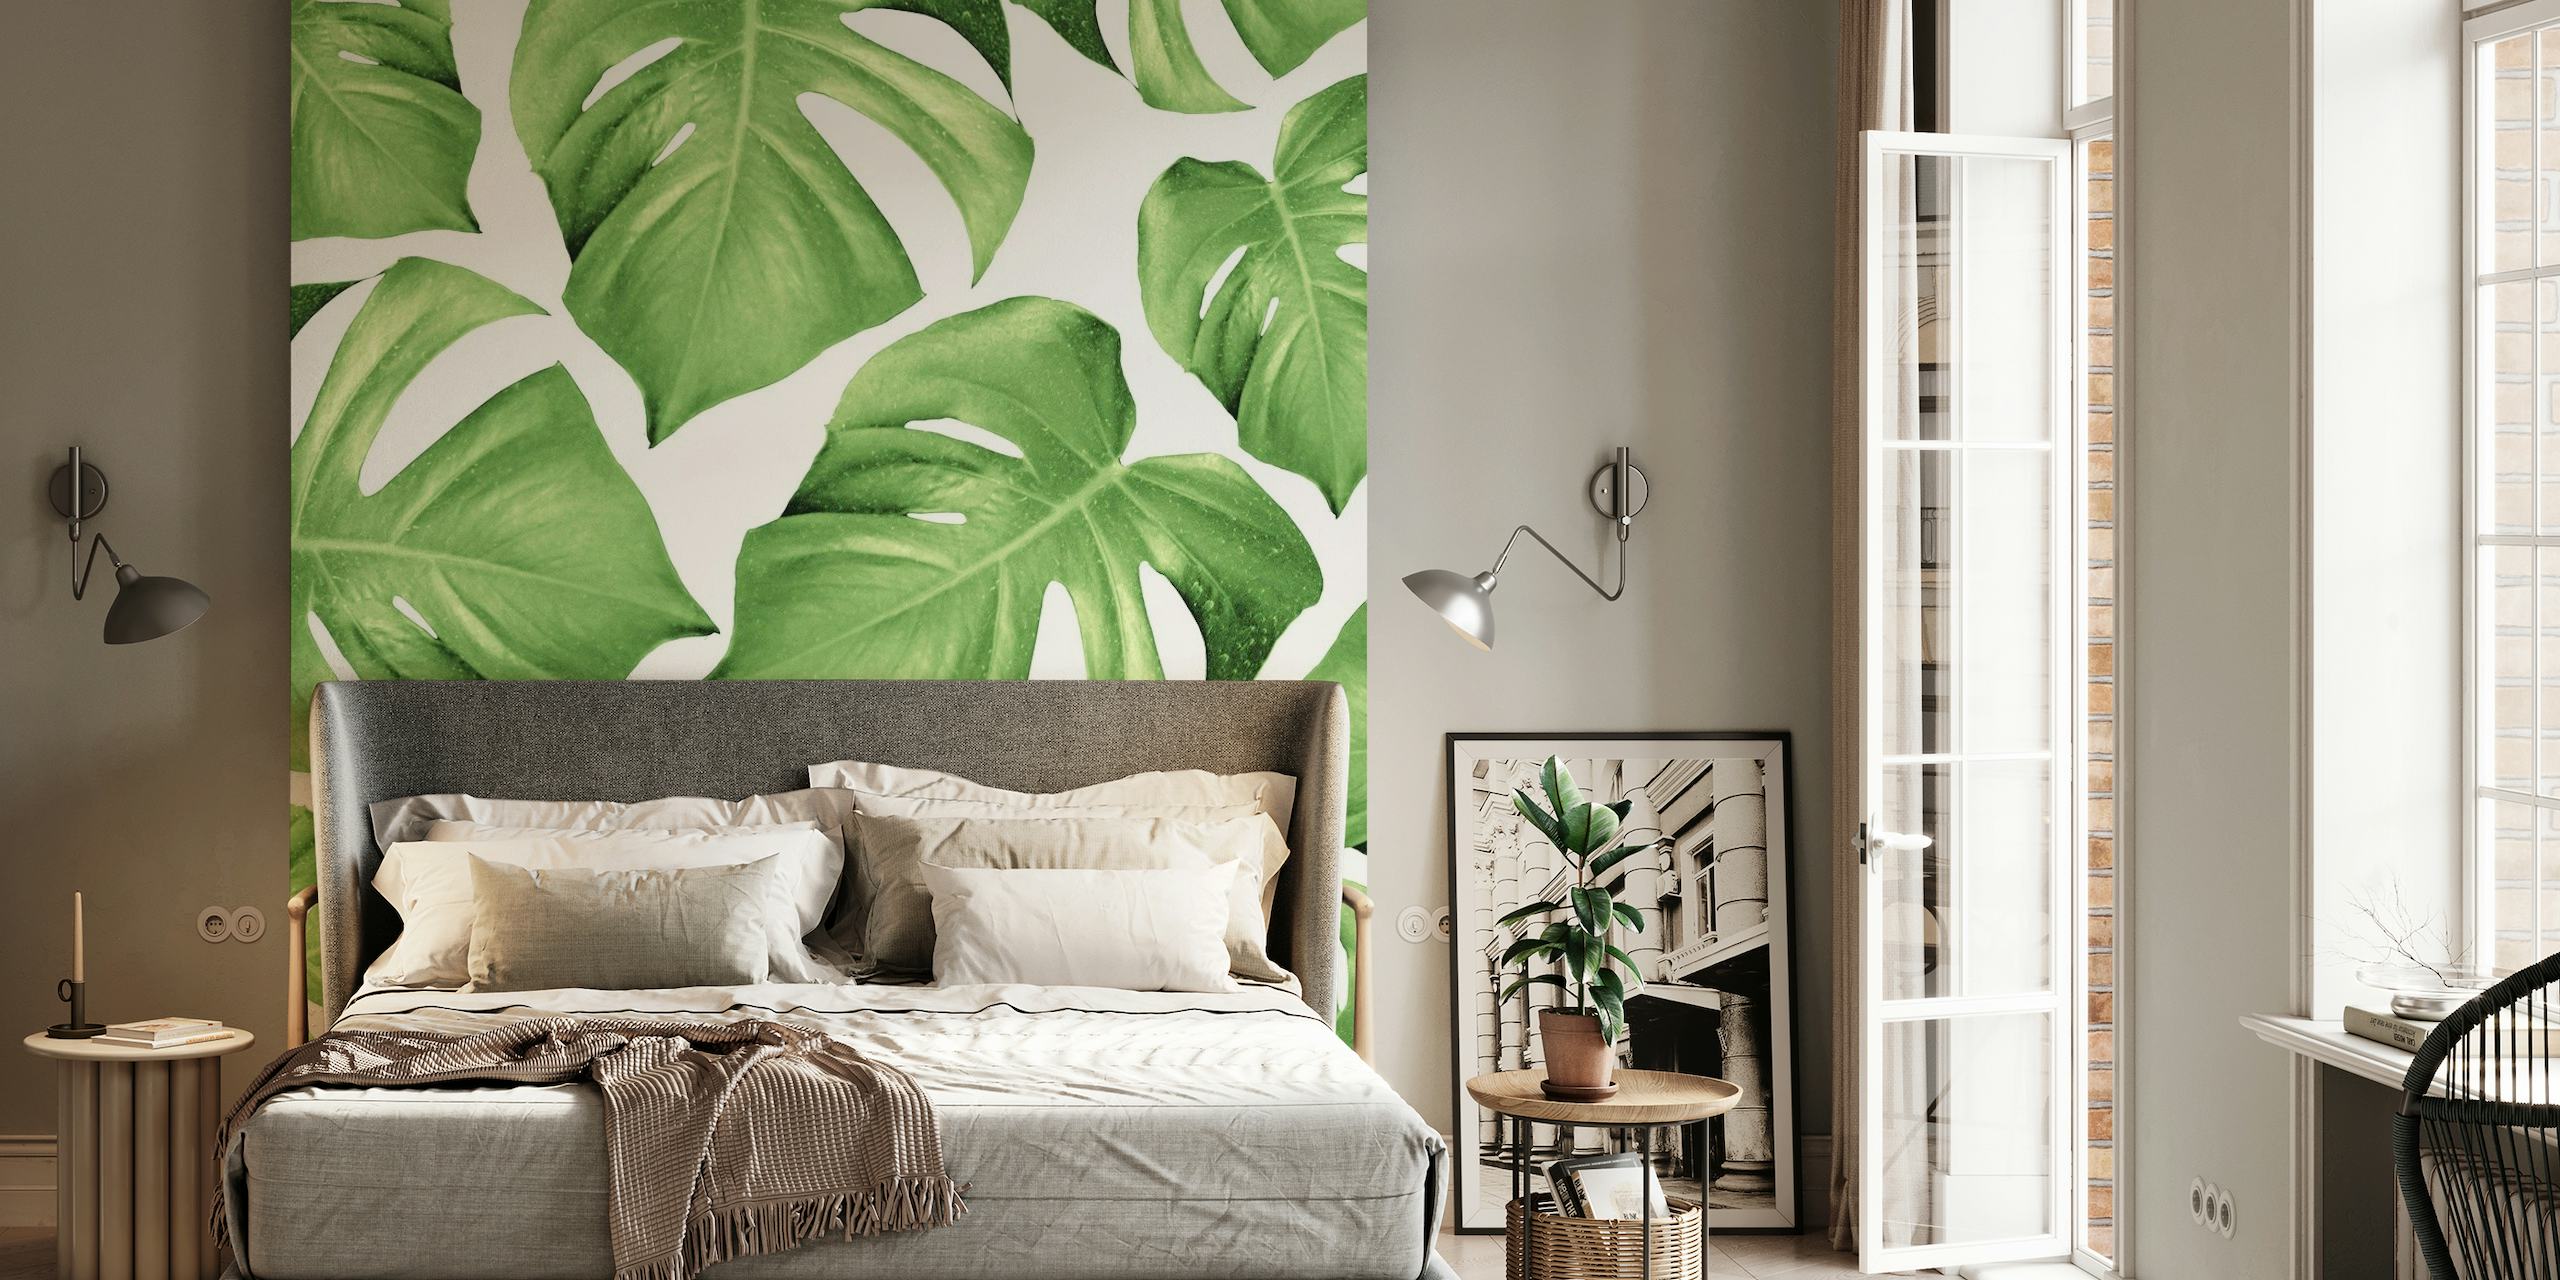 Monstera Leaves Green 1 wall mural showing a pattern of lush tropical monstera leaves.